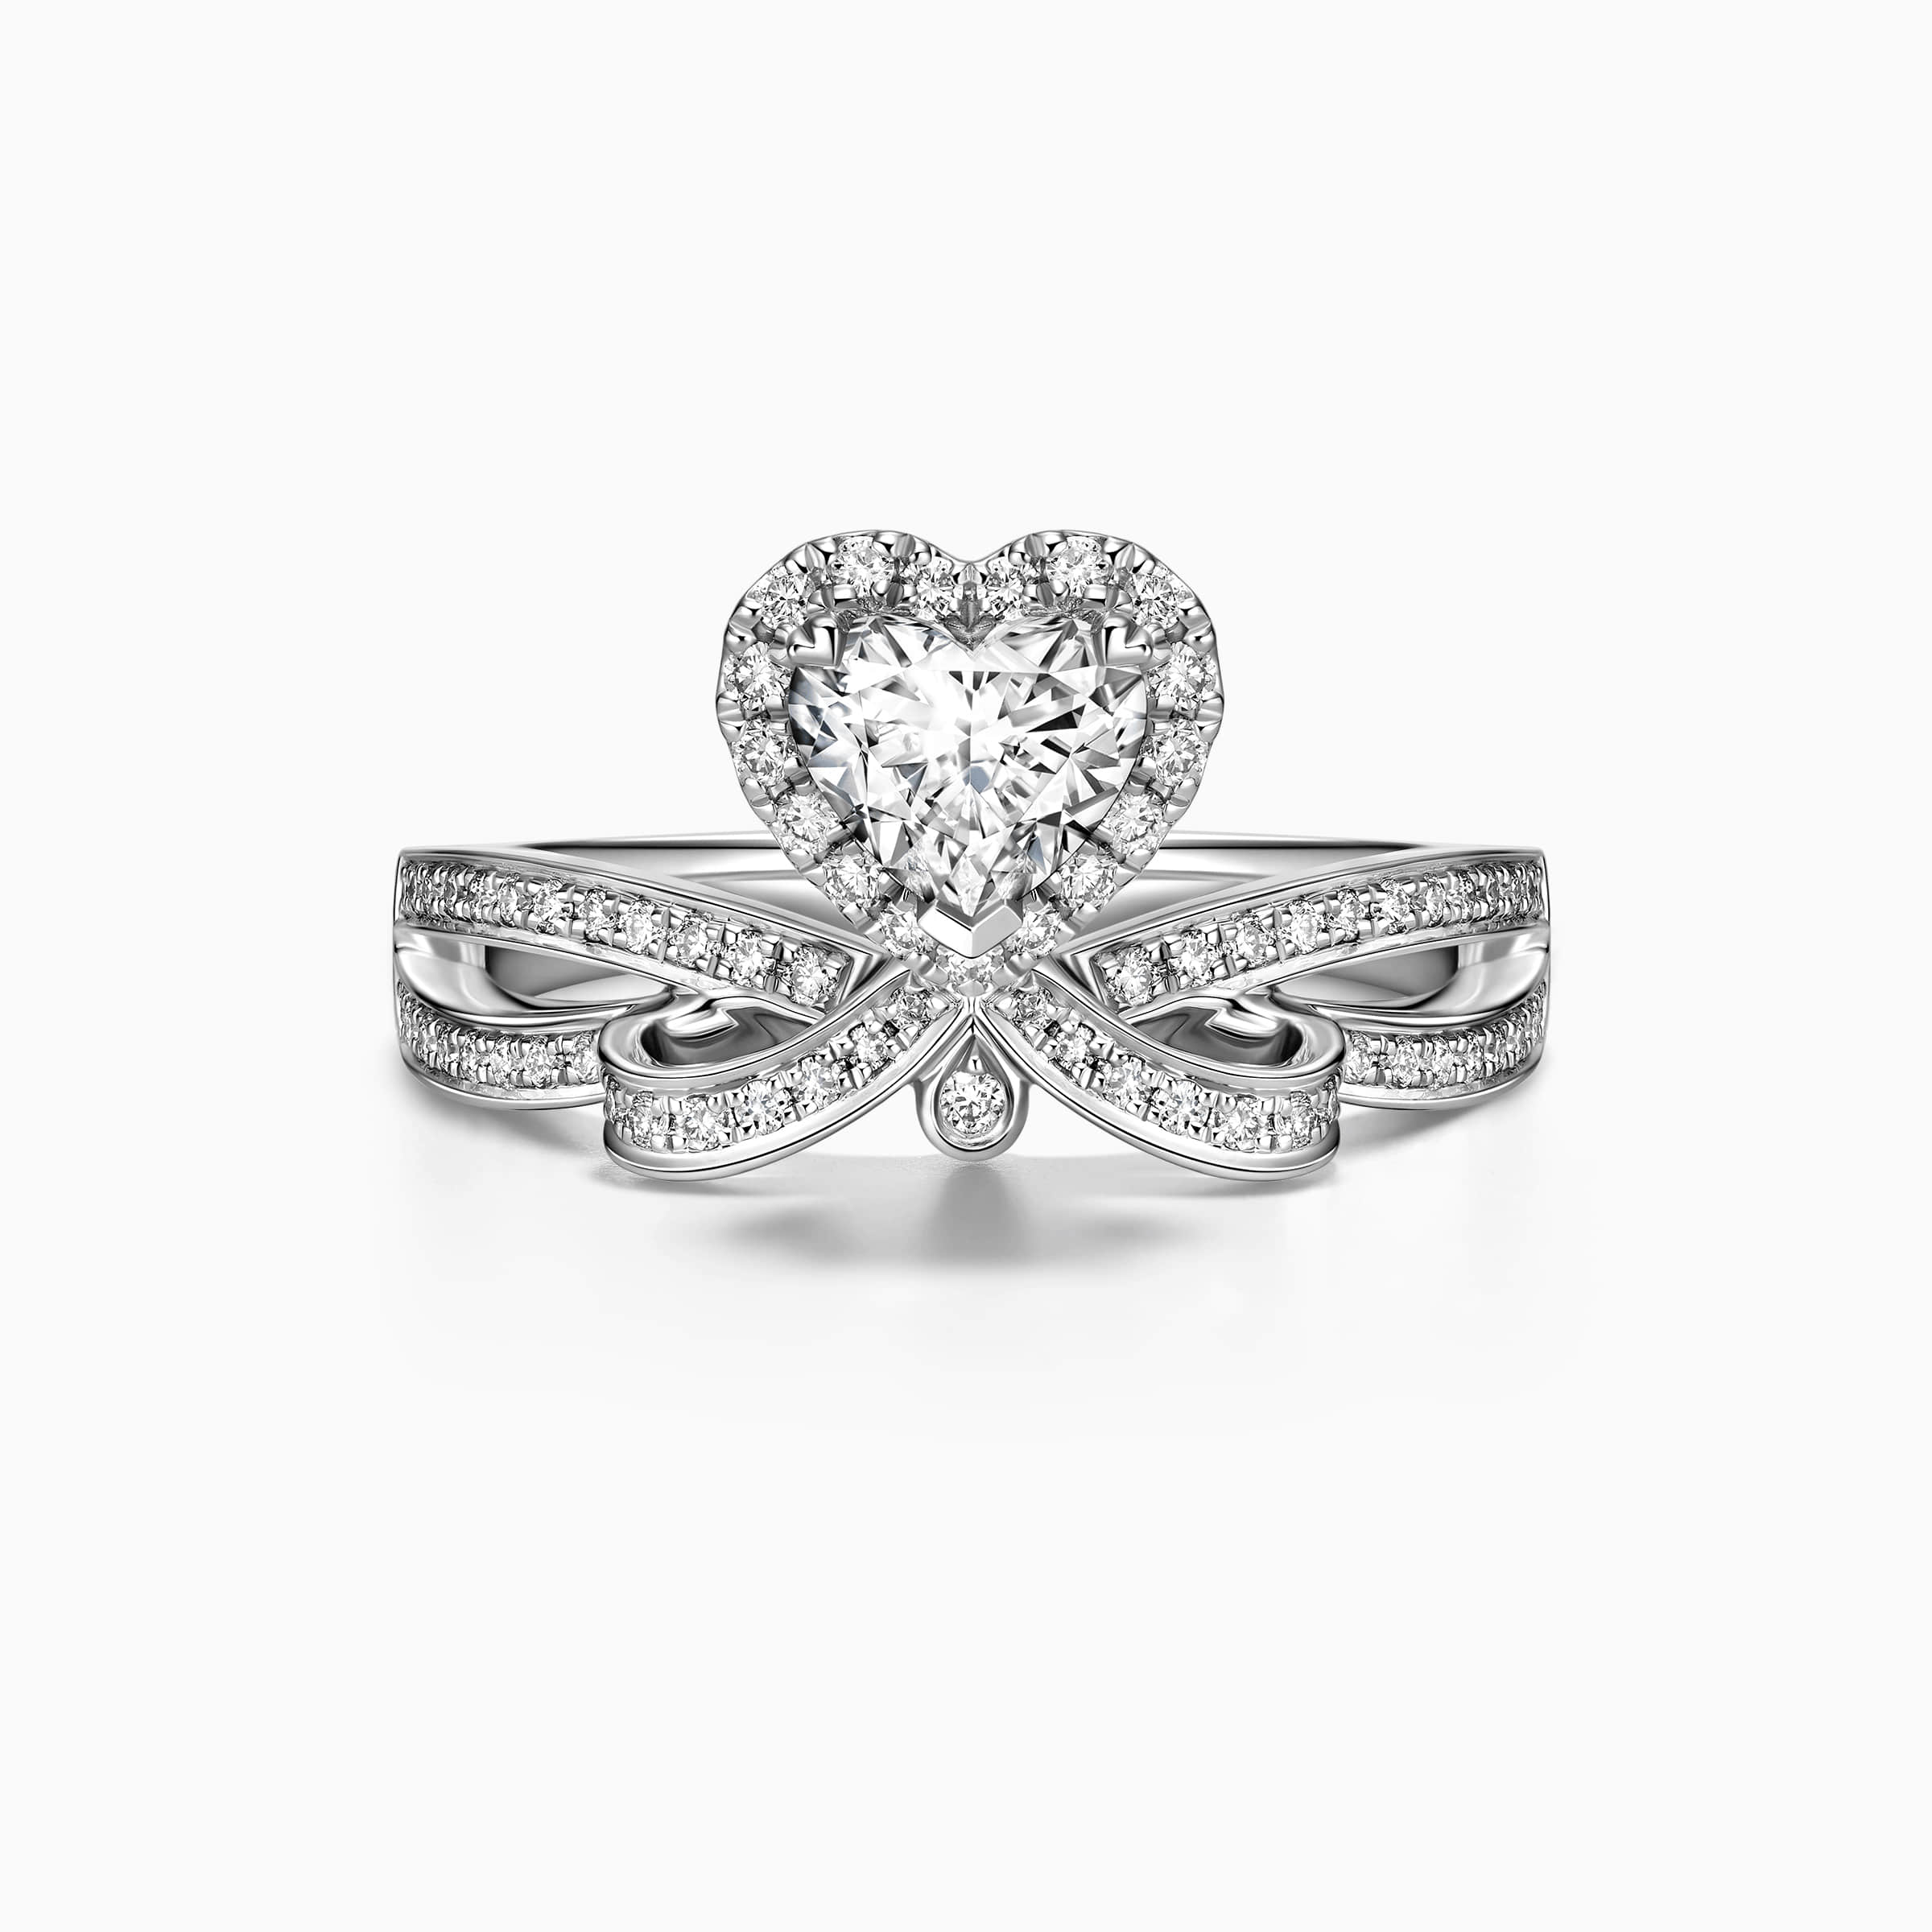 DR crown engagement ring with heart cut diamond